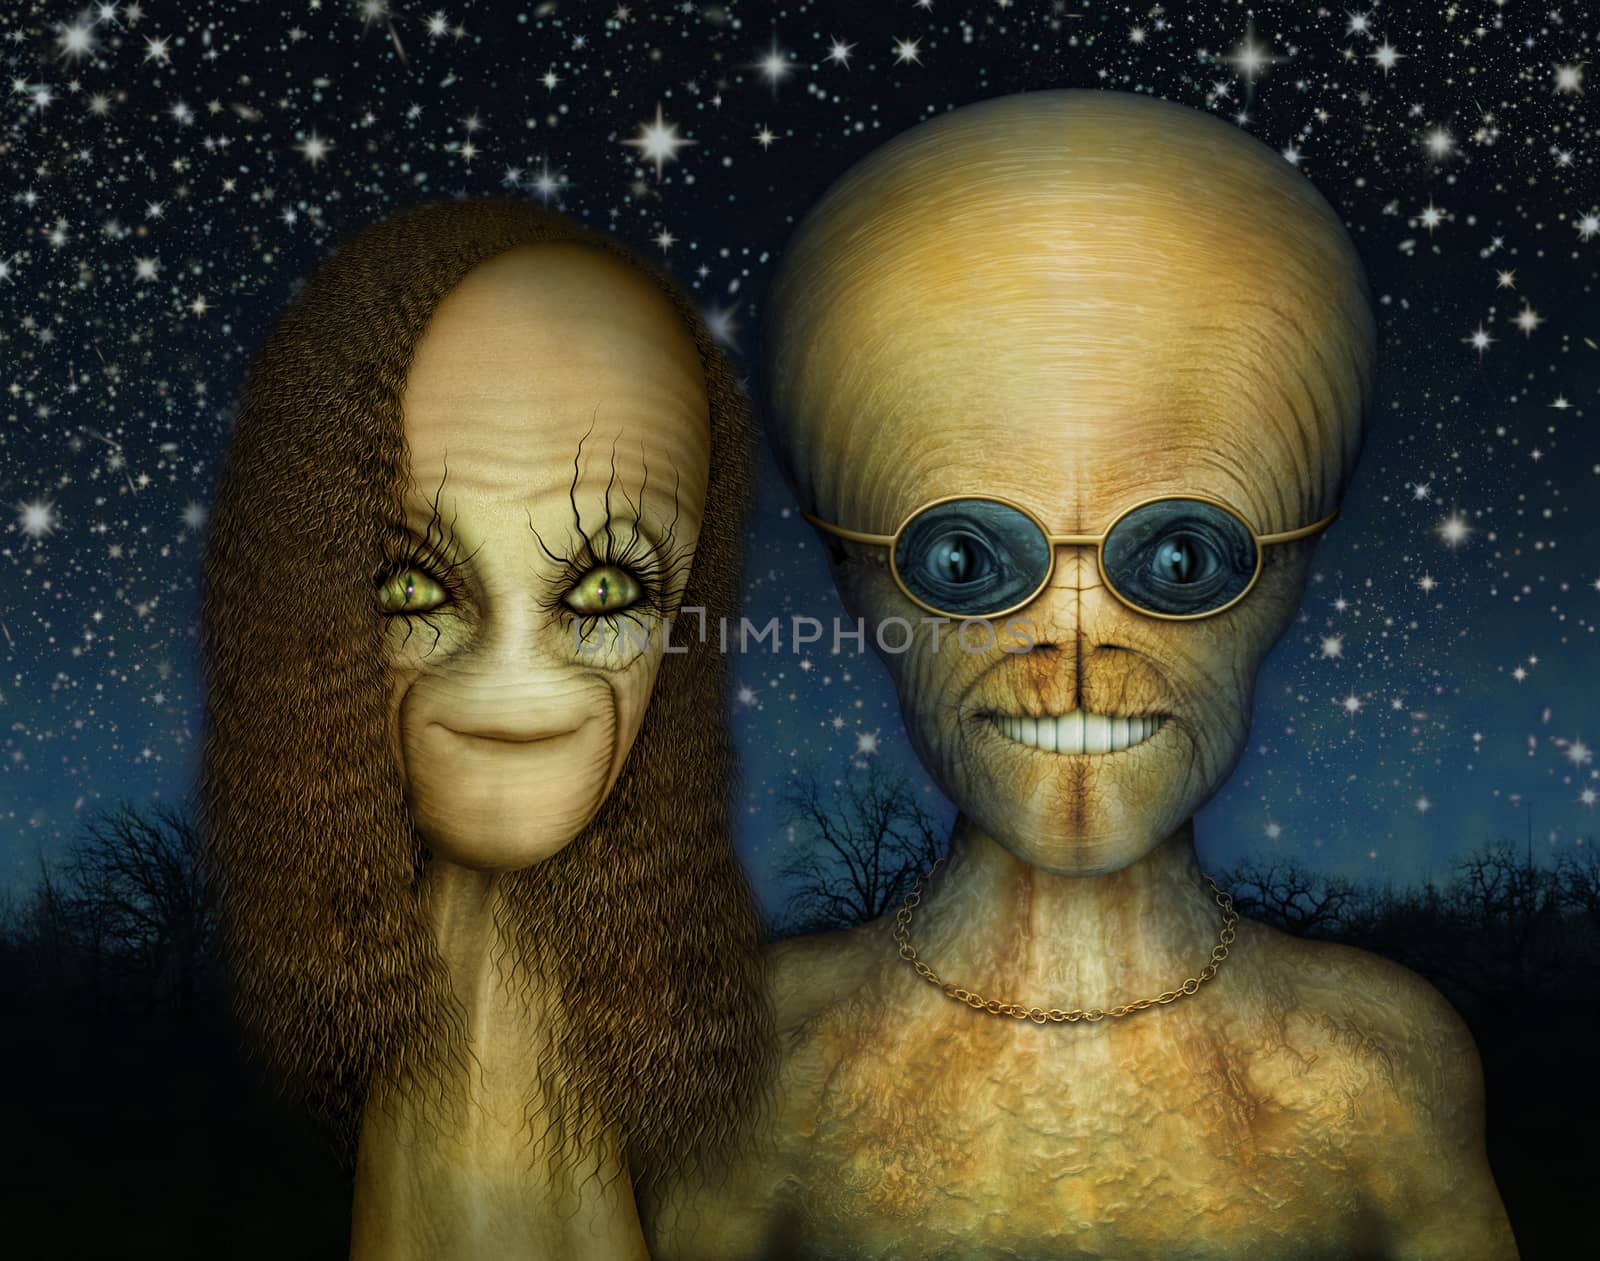 Alien couple standing together with the night sky in the background.